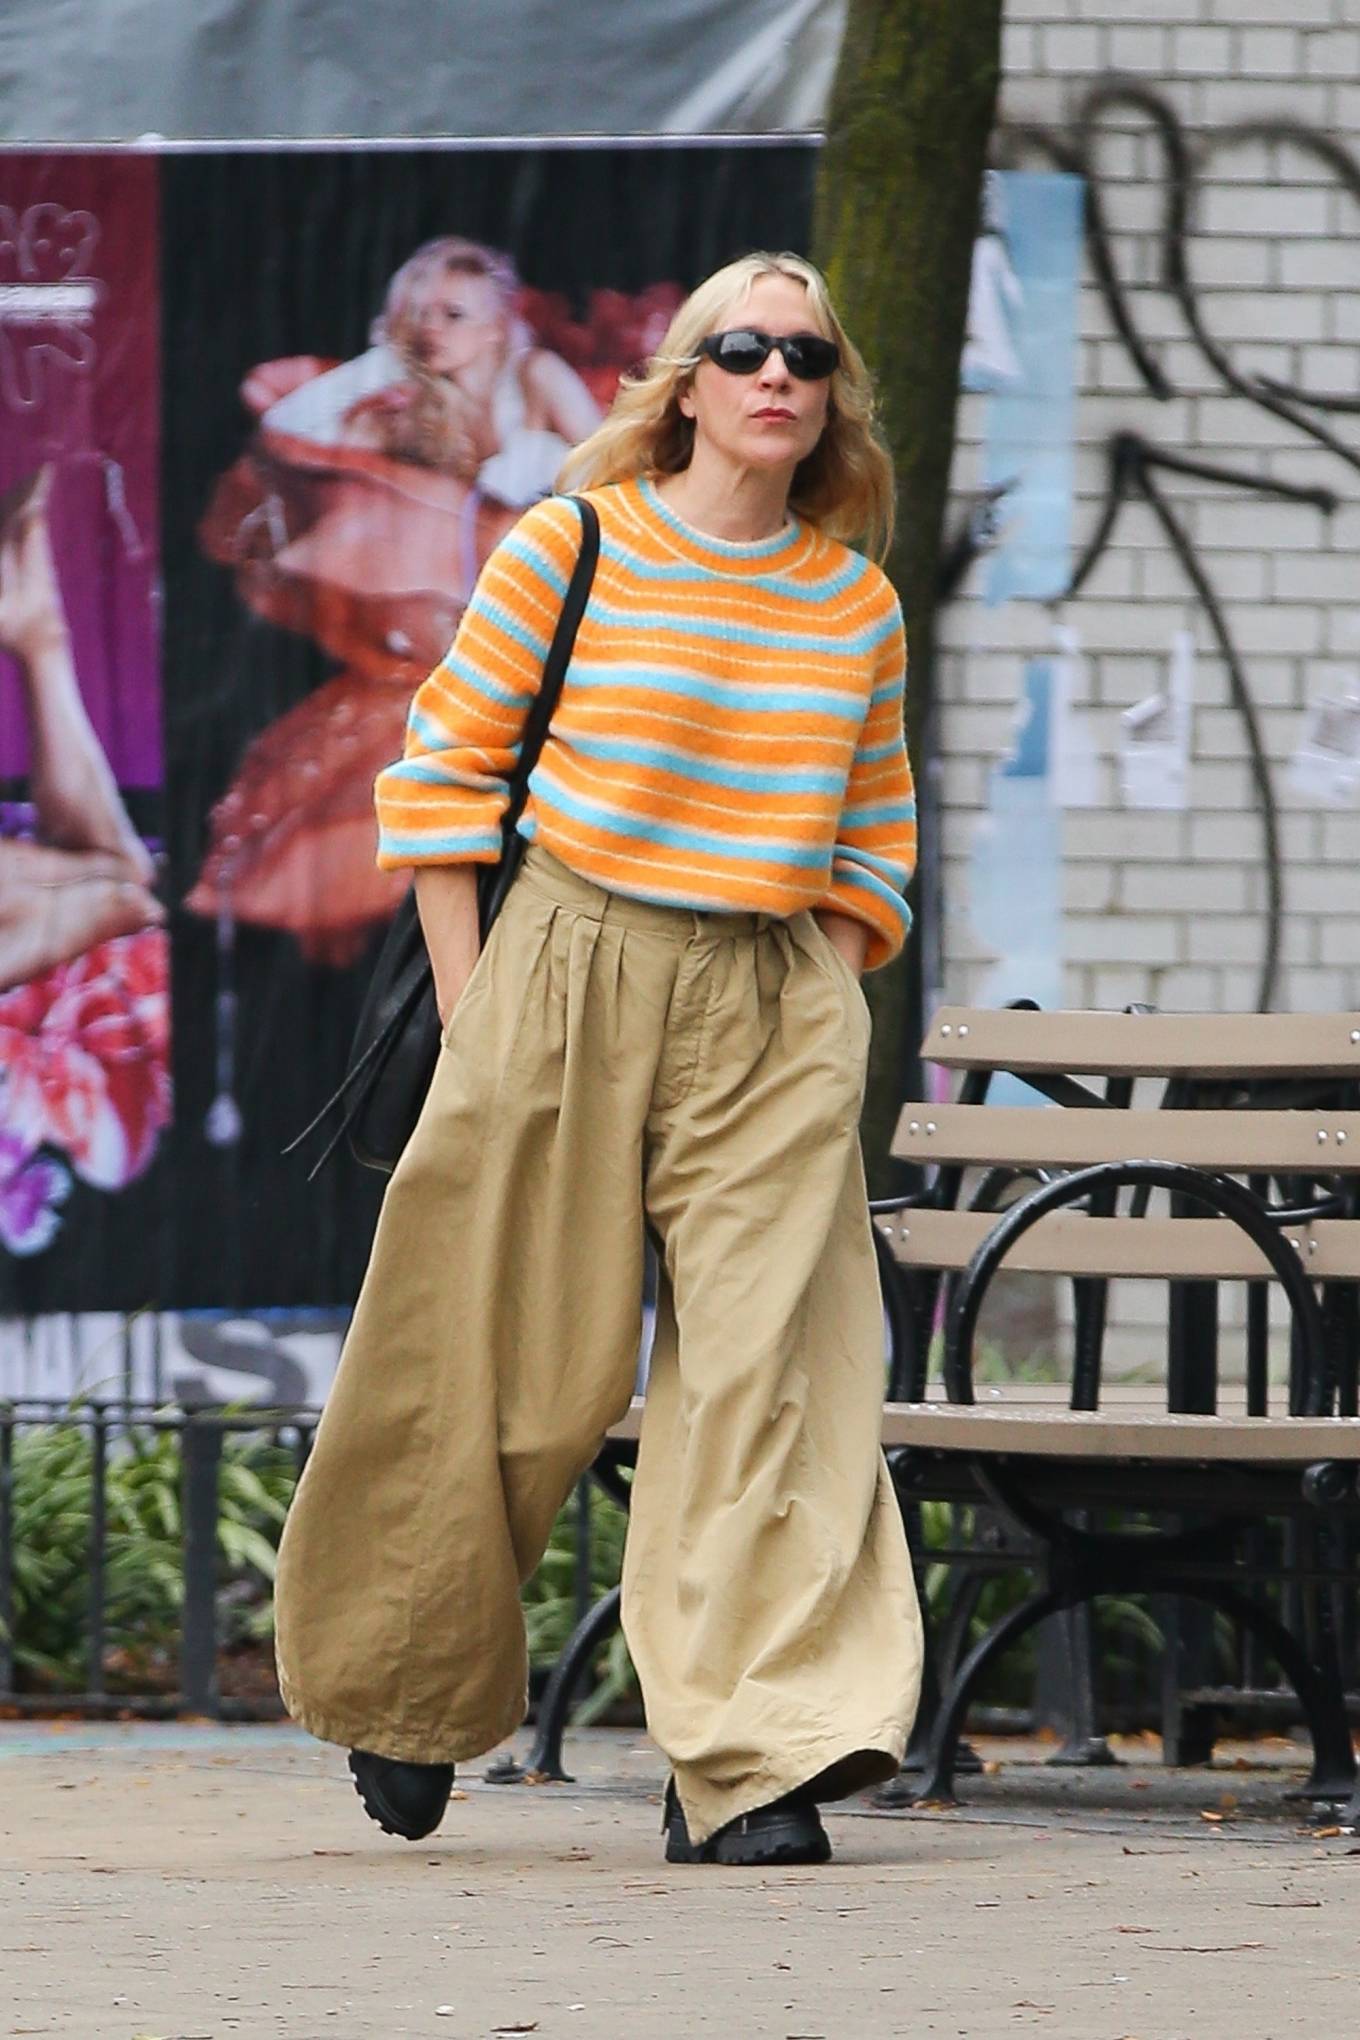 Chloe Sevigny - Looking stylish in a fall-weather outfit in New York